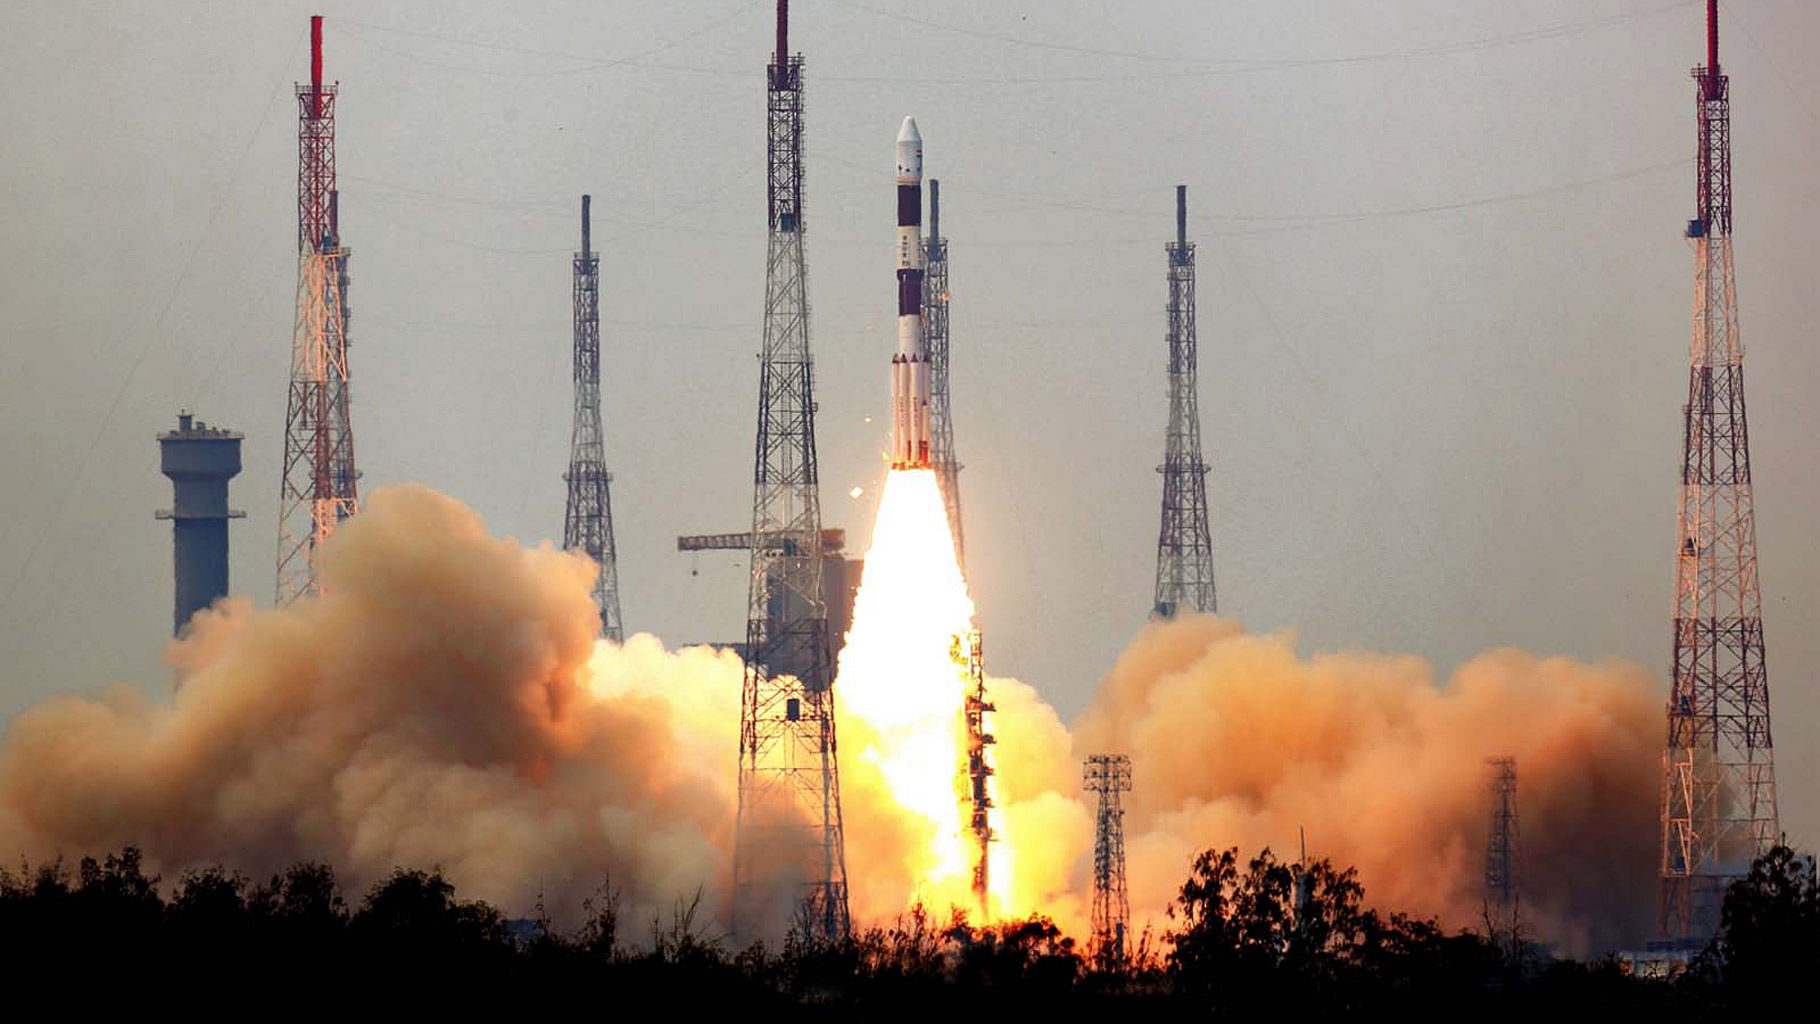 At 3.2 tonnes, the GSLV Mk-III will be the heaviest satellite to be lifted by an Indian rocket. (Photo: ISRO)